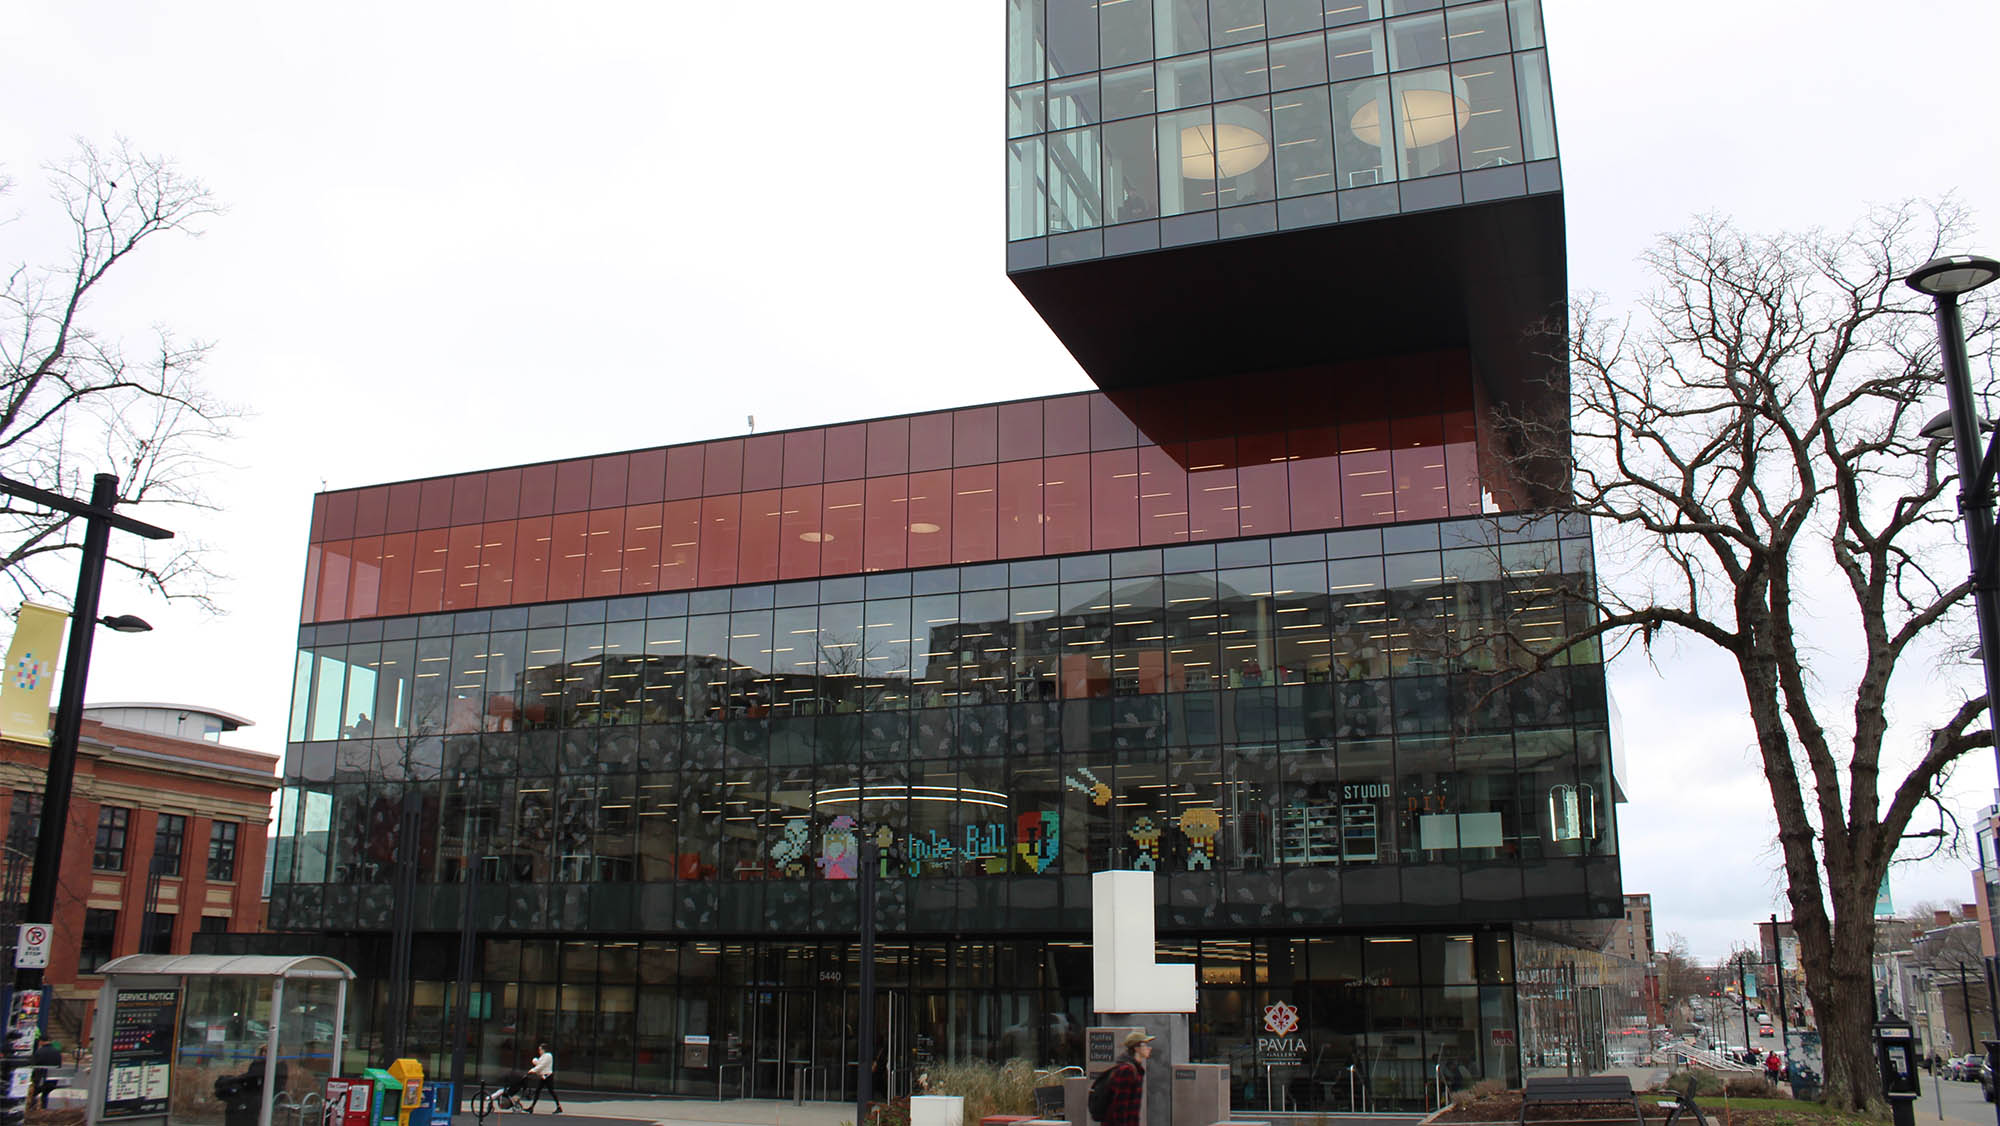 The Halifax Central Library is LEED gold certified. The building uses transparent glass for natural light and harvests rainwater.